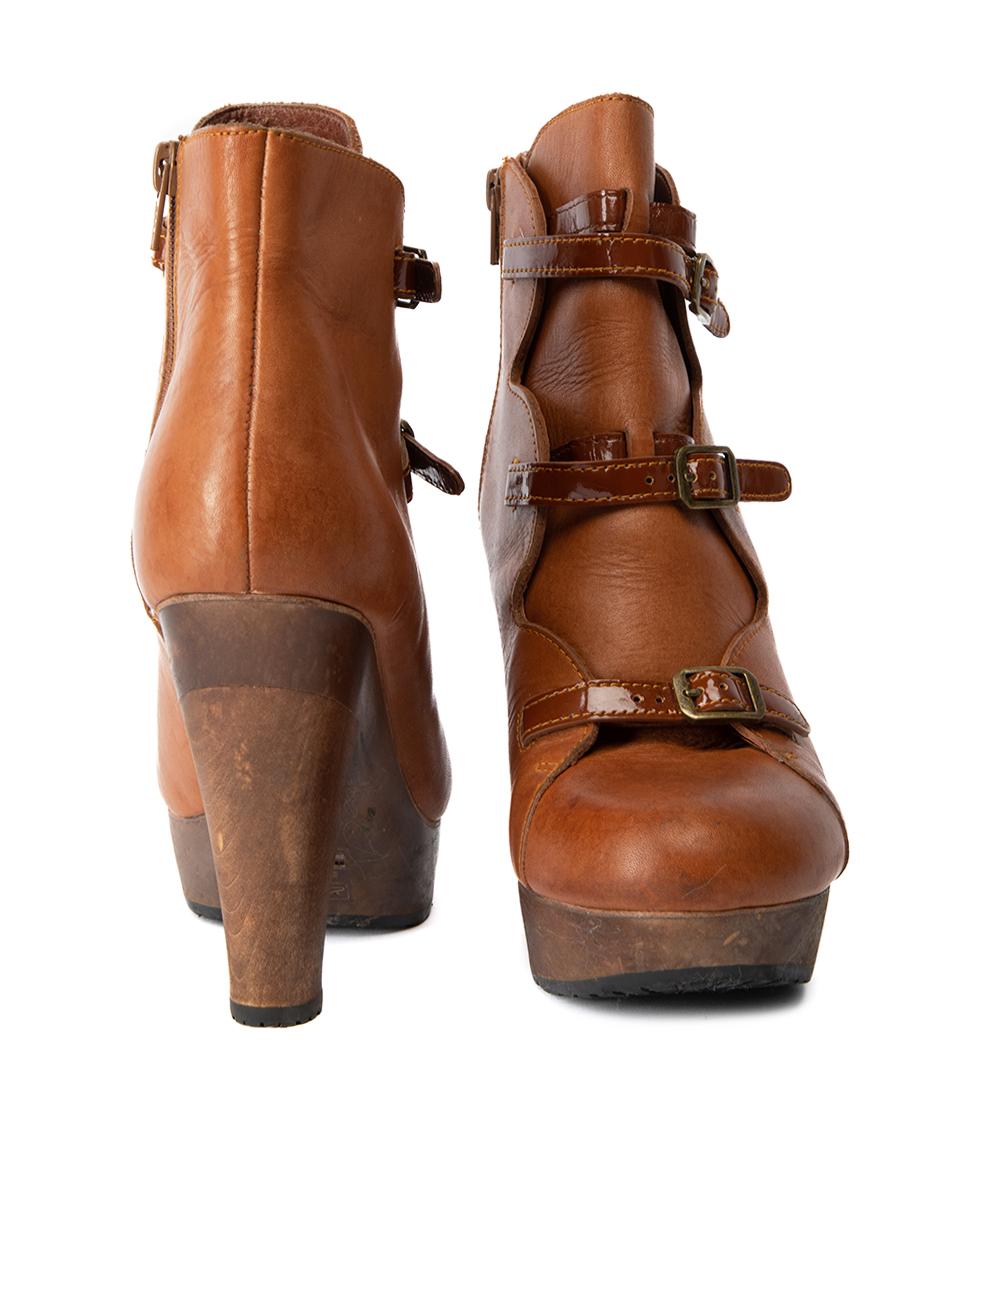 CONDITION is Very Good. Minimal wear to boots is evident. Minimal wear and creasing can be seen on the exterior leather fabric to this See by Chloé designer resale item. Details Brown Leather Ankle boots Round toe Platform high wooden heel Buckled